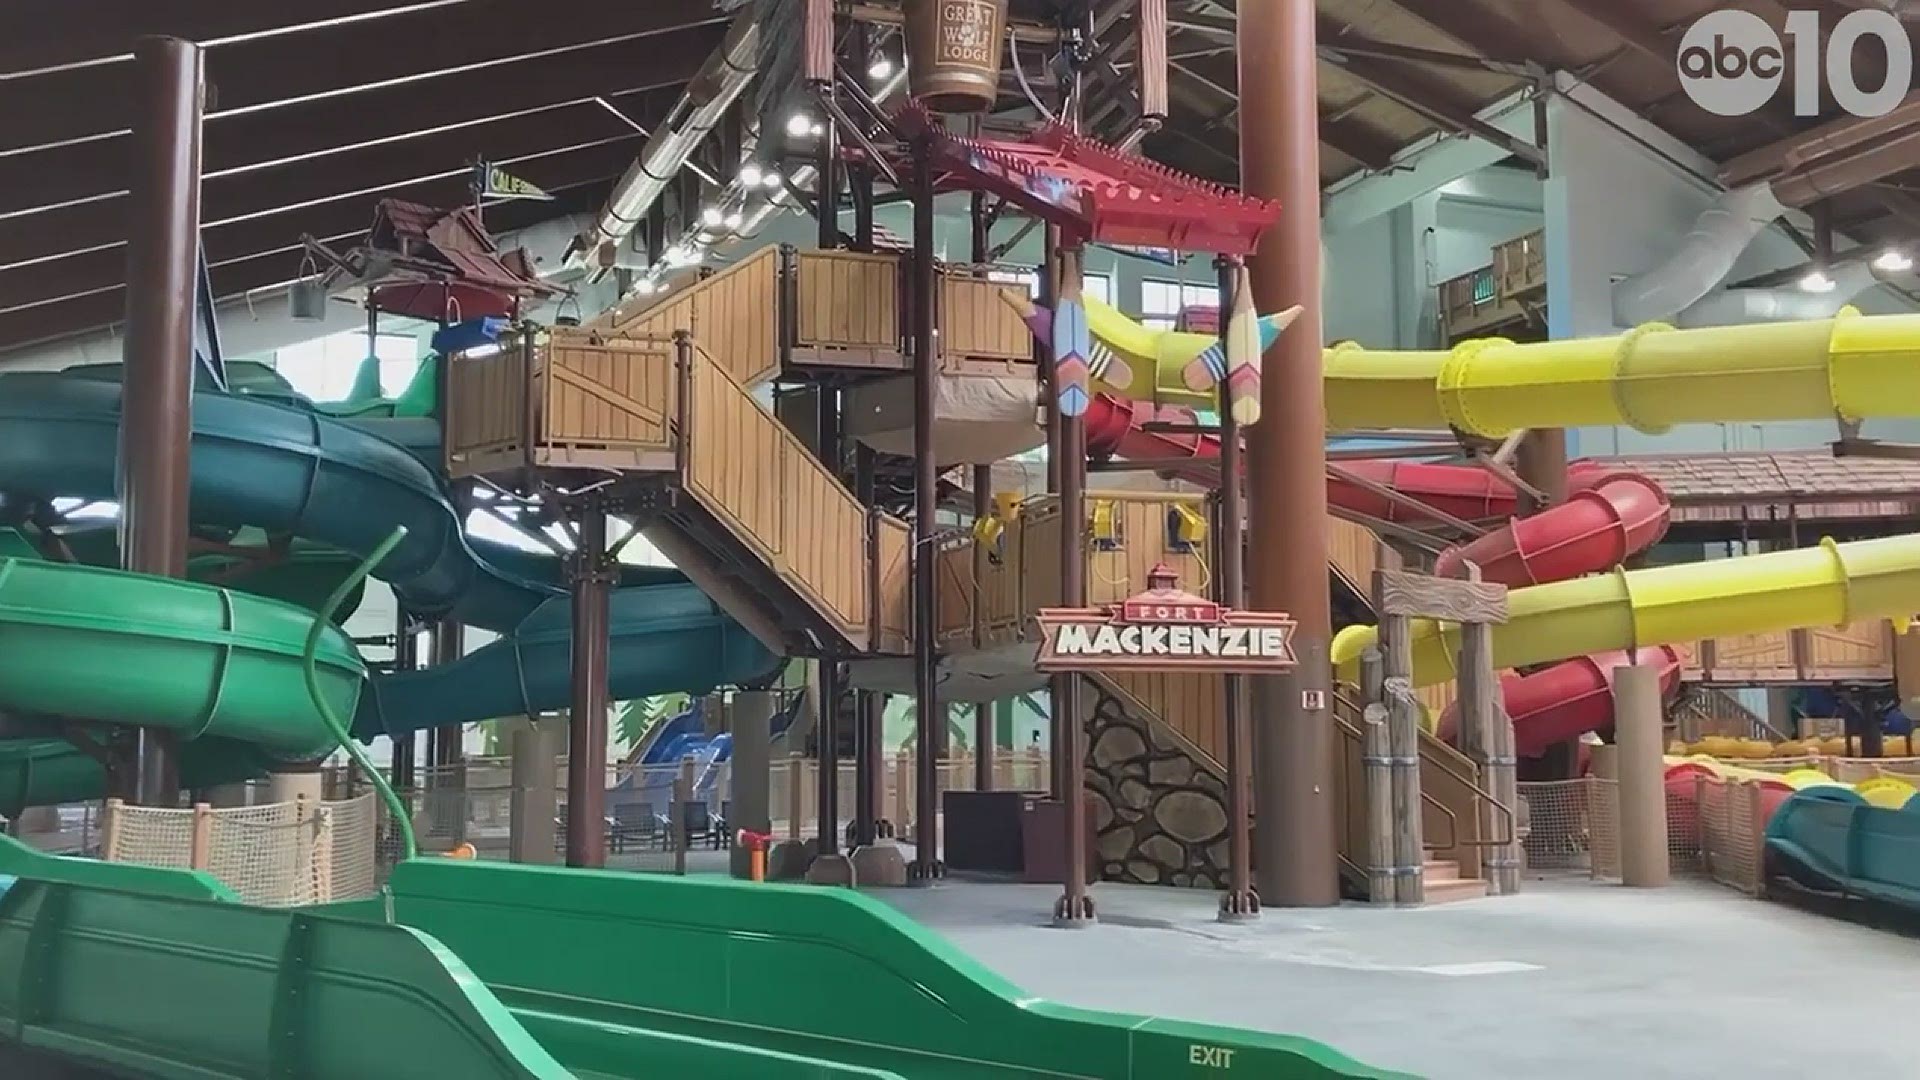 Lena Howland was in Manteca at the Great Wolf Lodge where she captured a video showing what guests can expect to see when the waterpark opens on June 29th.